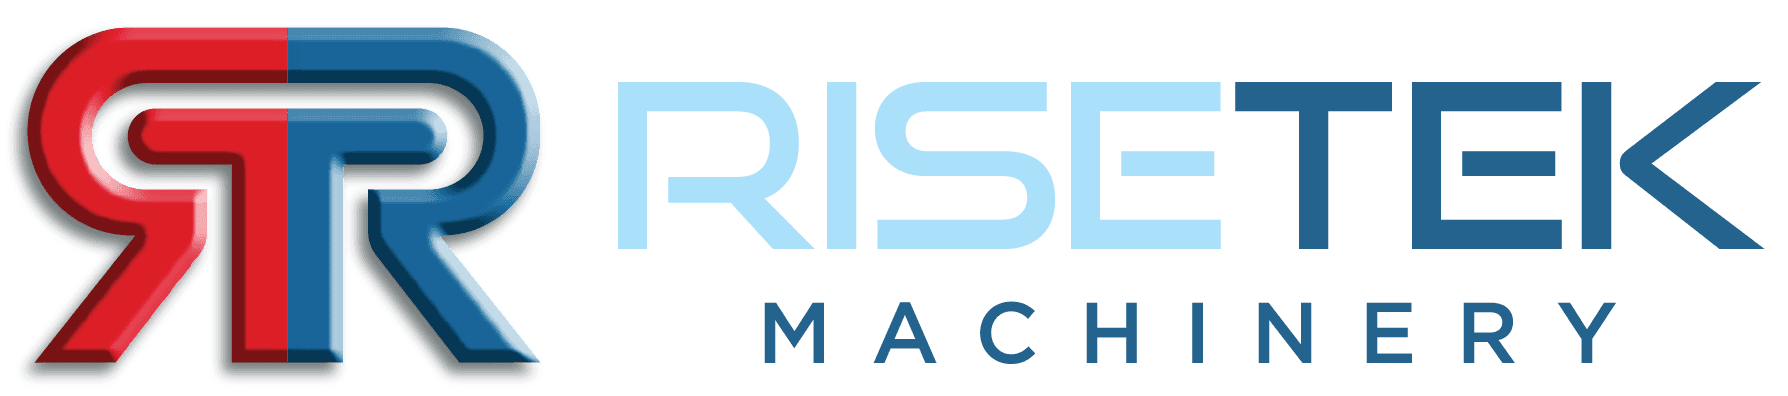 Product Services | Rise Tek Machinery image